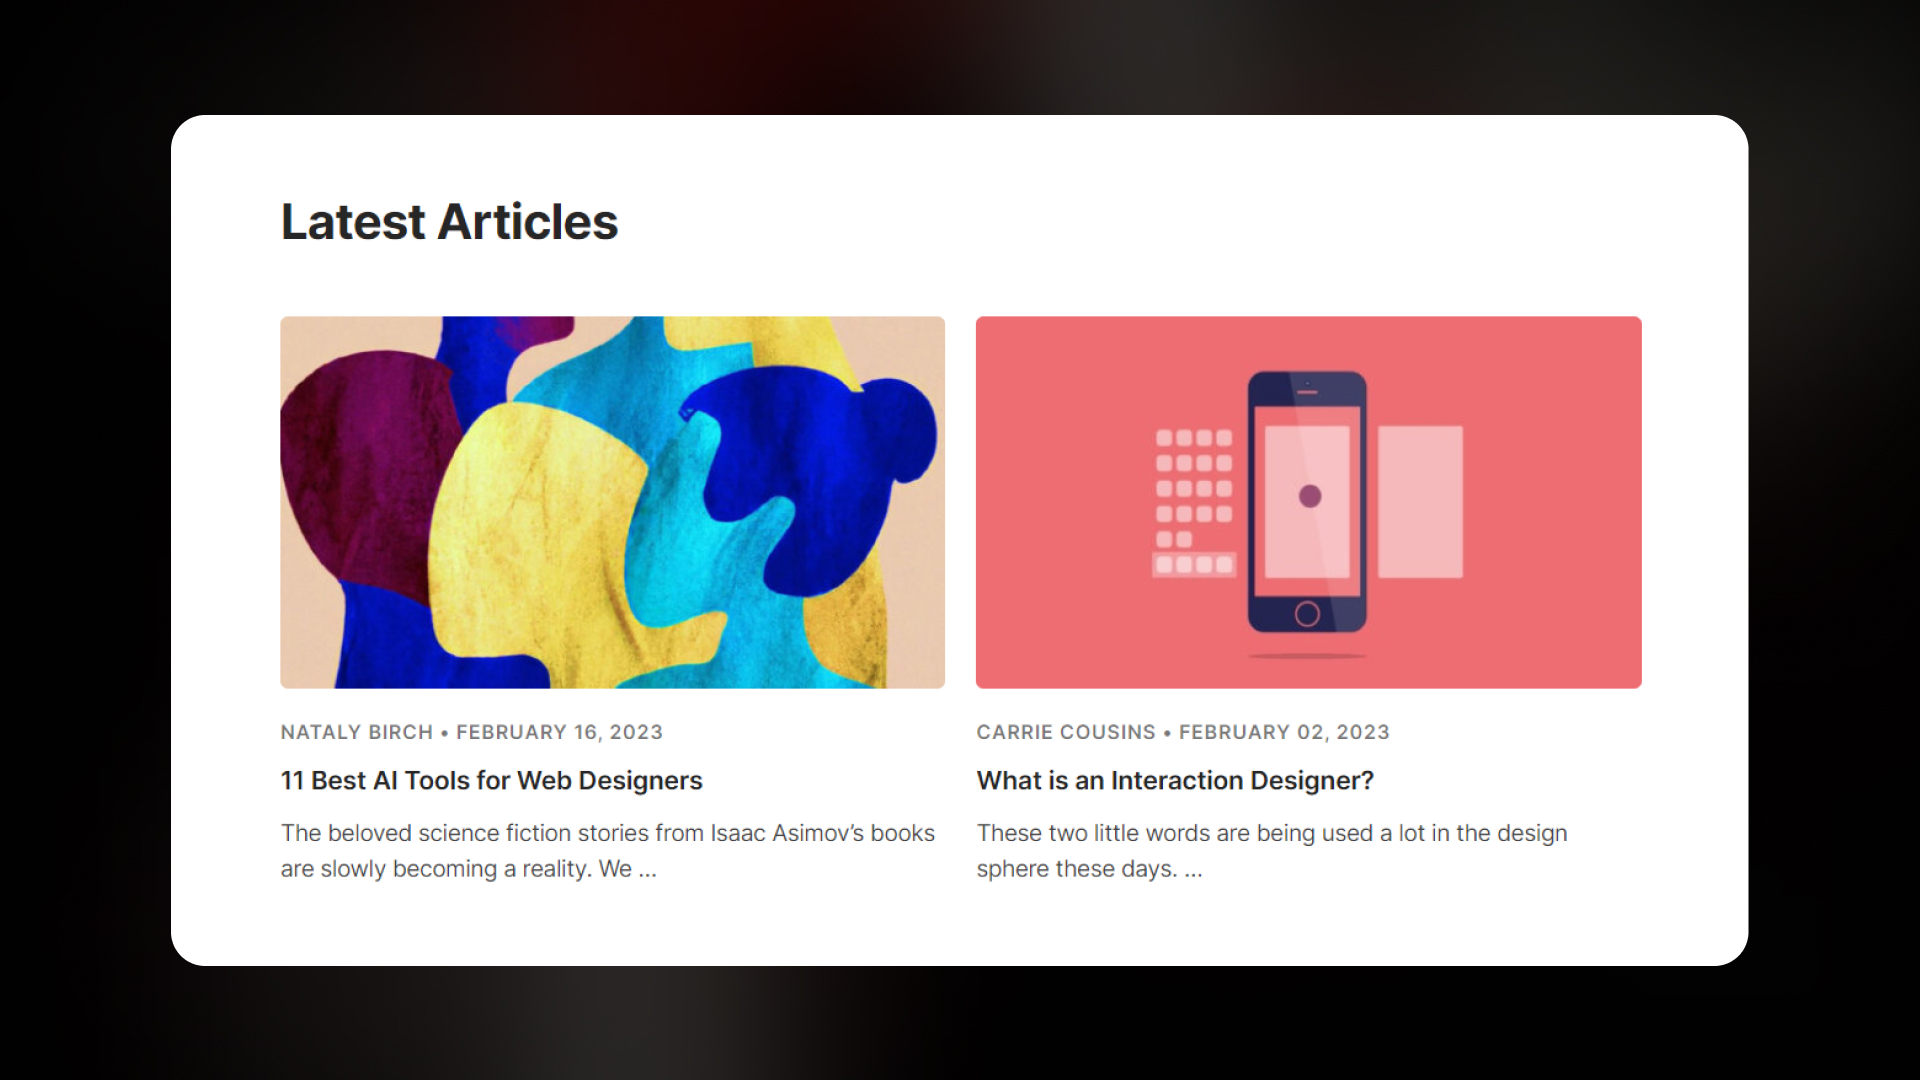 Guest articles on the web-design news site